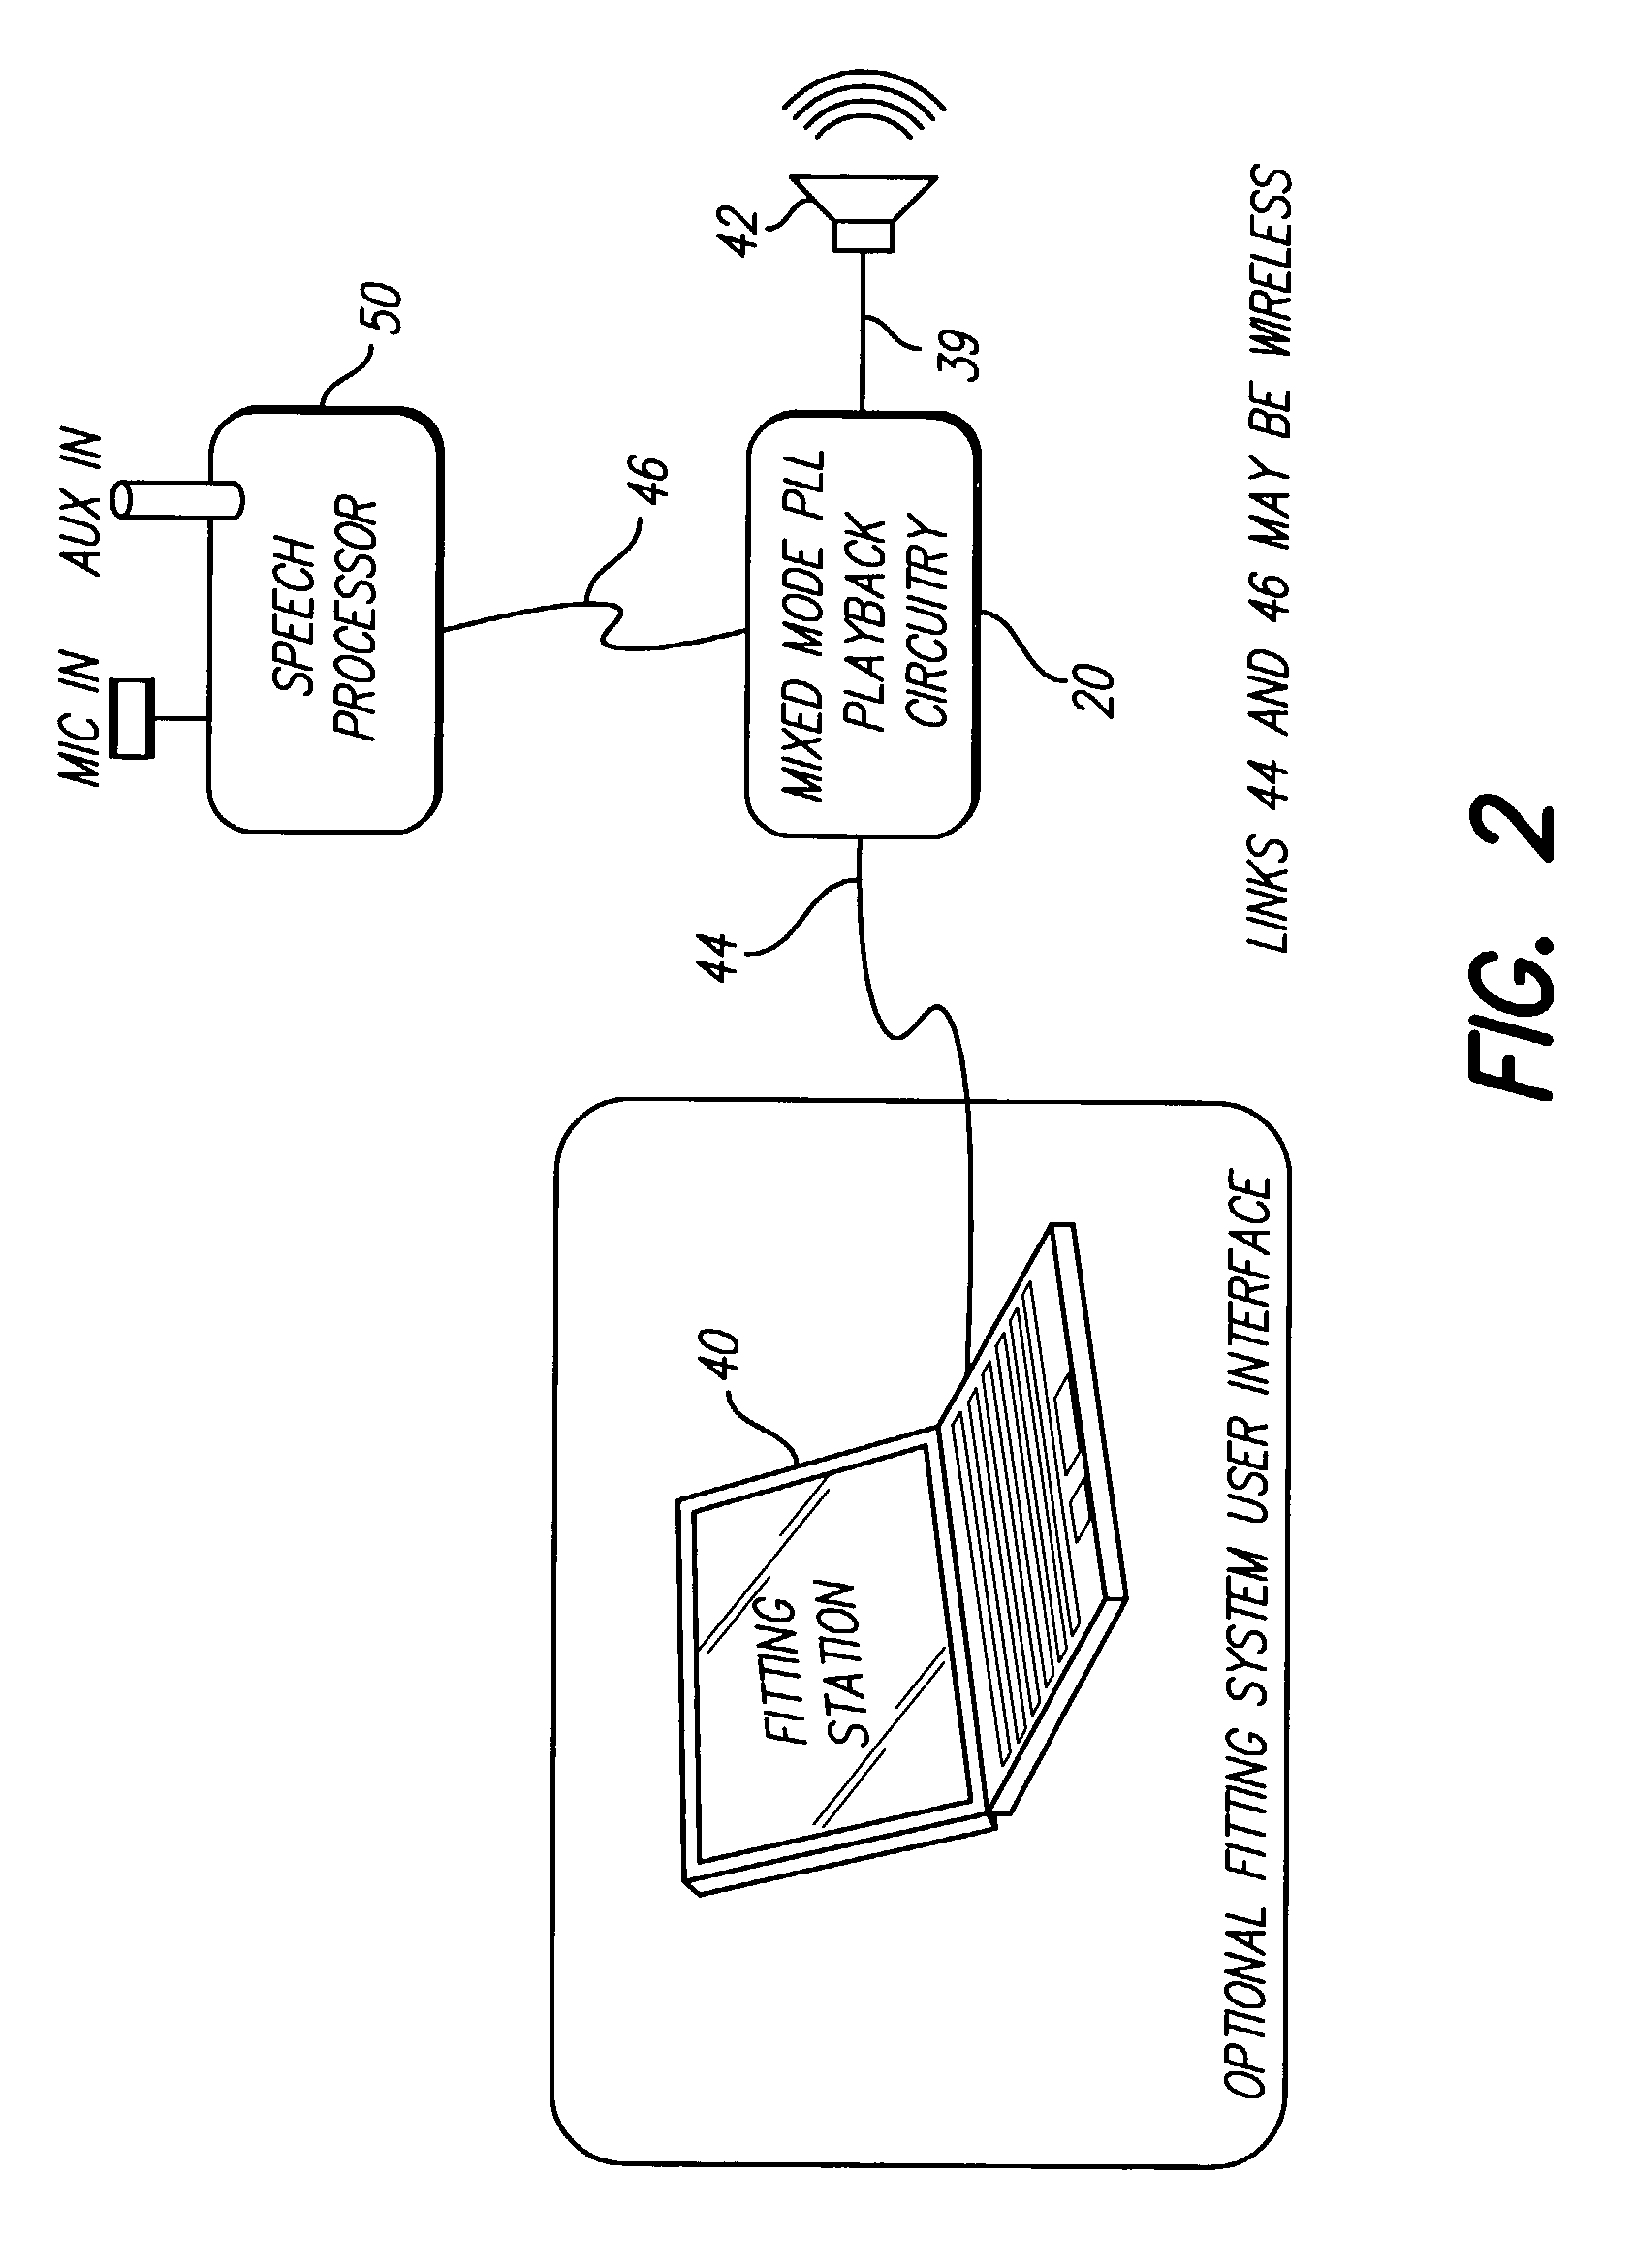 Auto-referencing mixed mode phase locked loop for audio playback applications